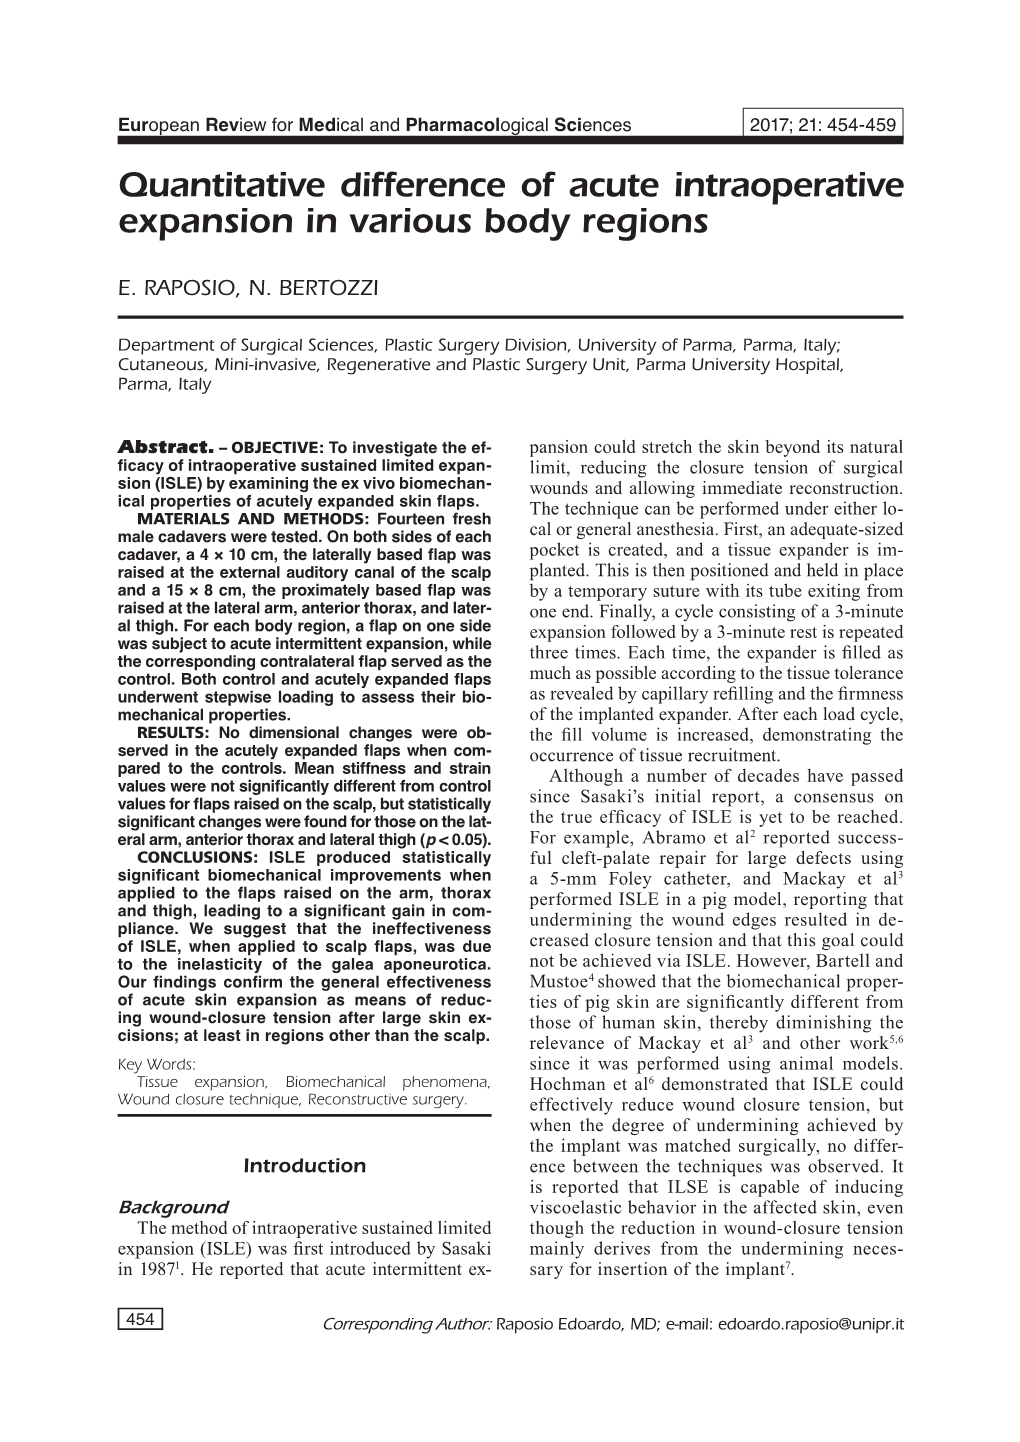 Quantitative Difference of Acute Intraoperative Expansion in Various Body Regions